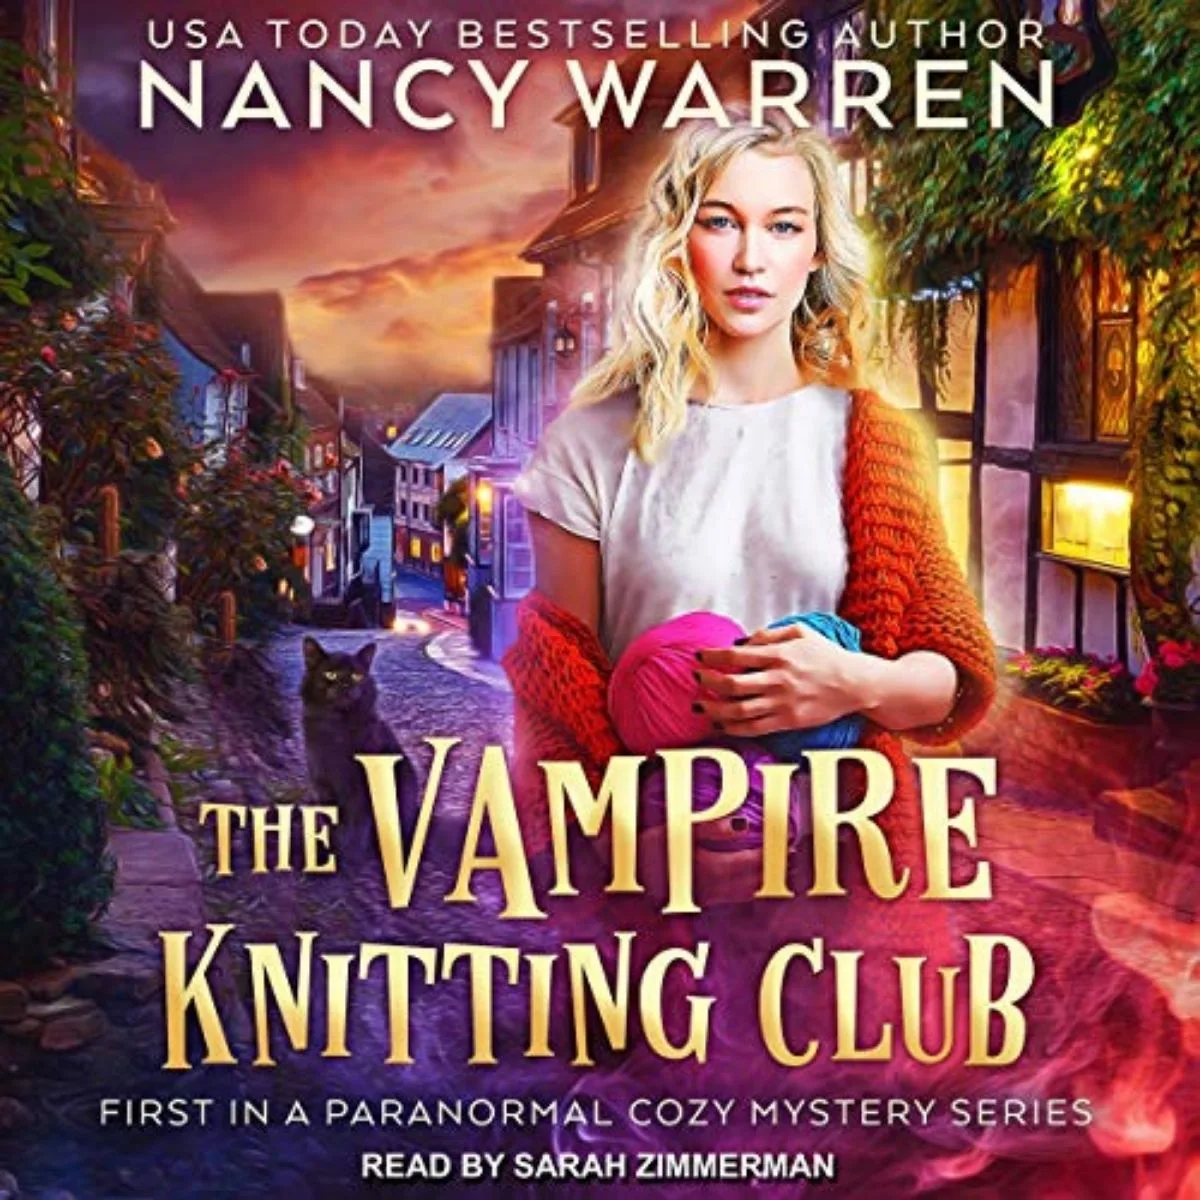 the vampire knitting club by Nancy Warren book to listen to while working on craft projects.